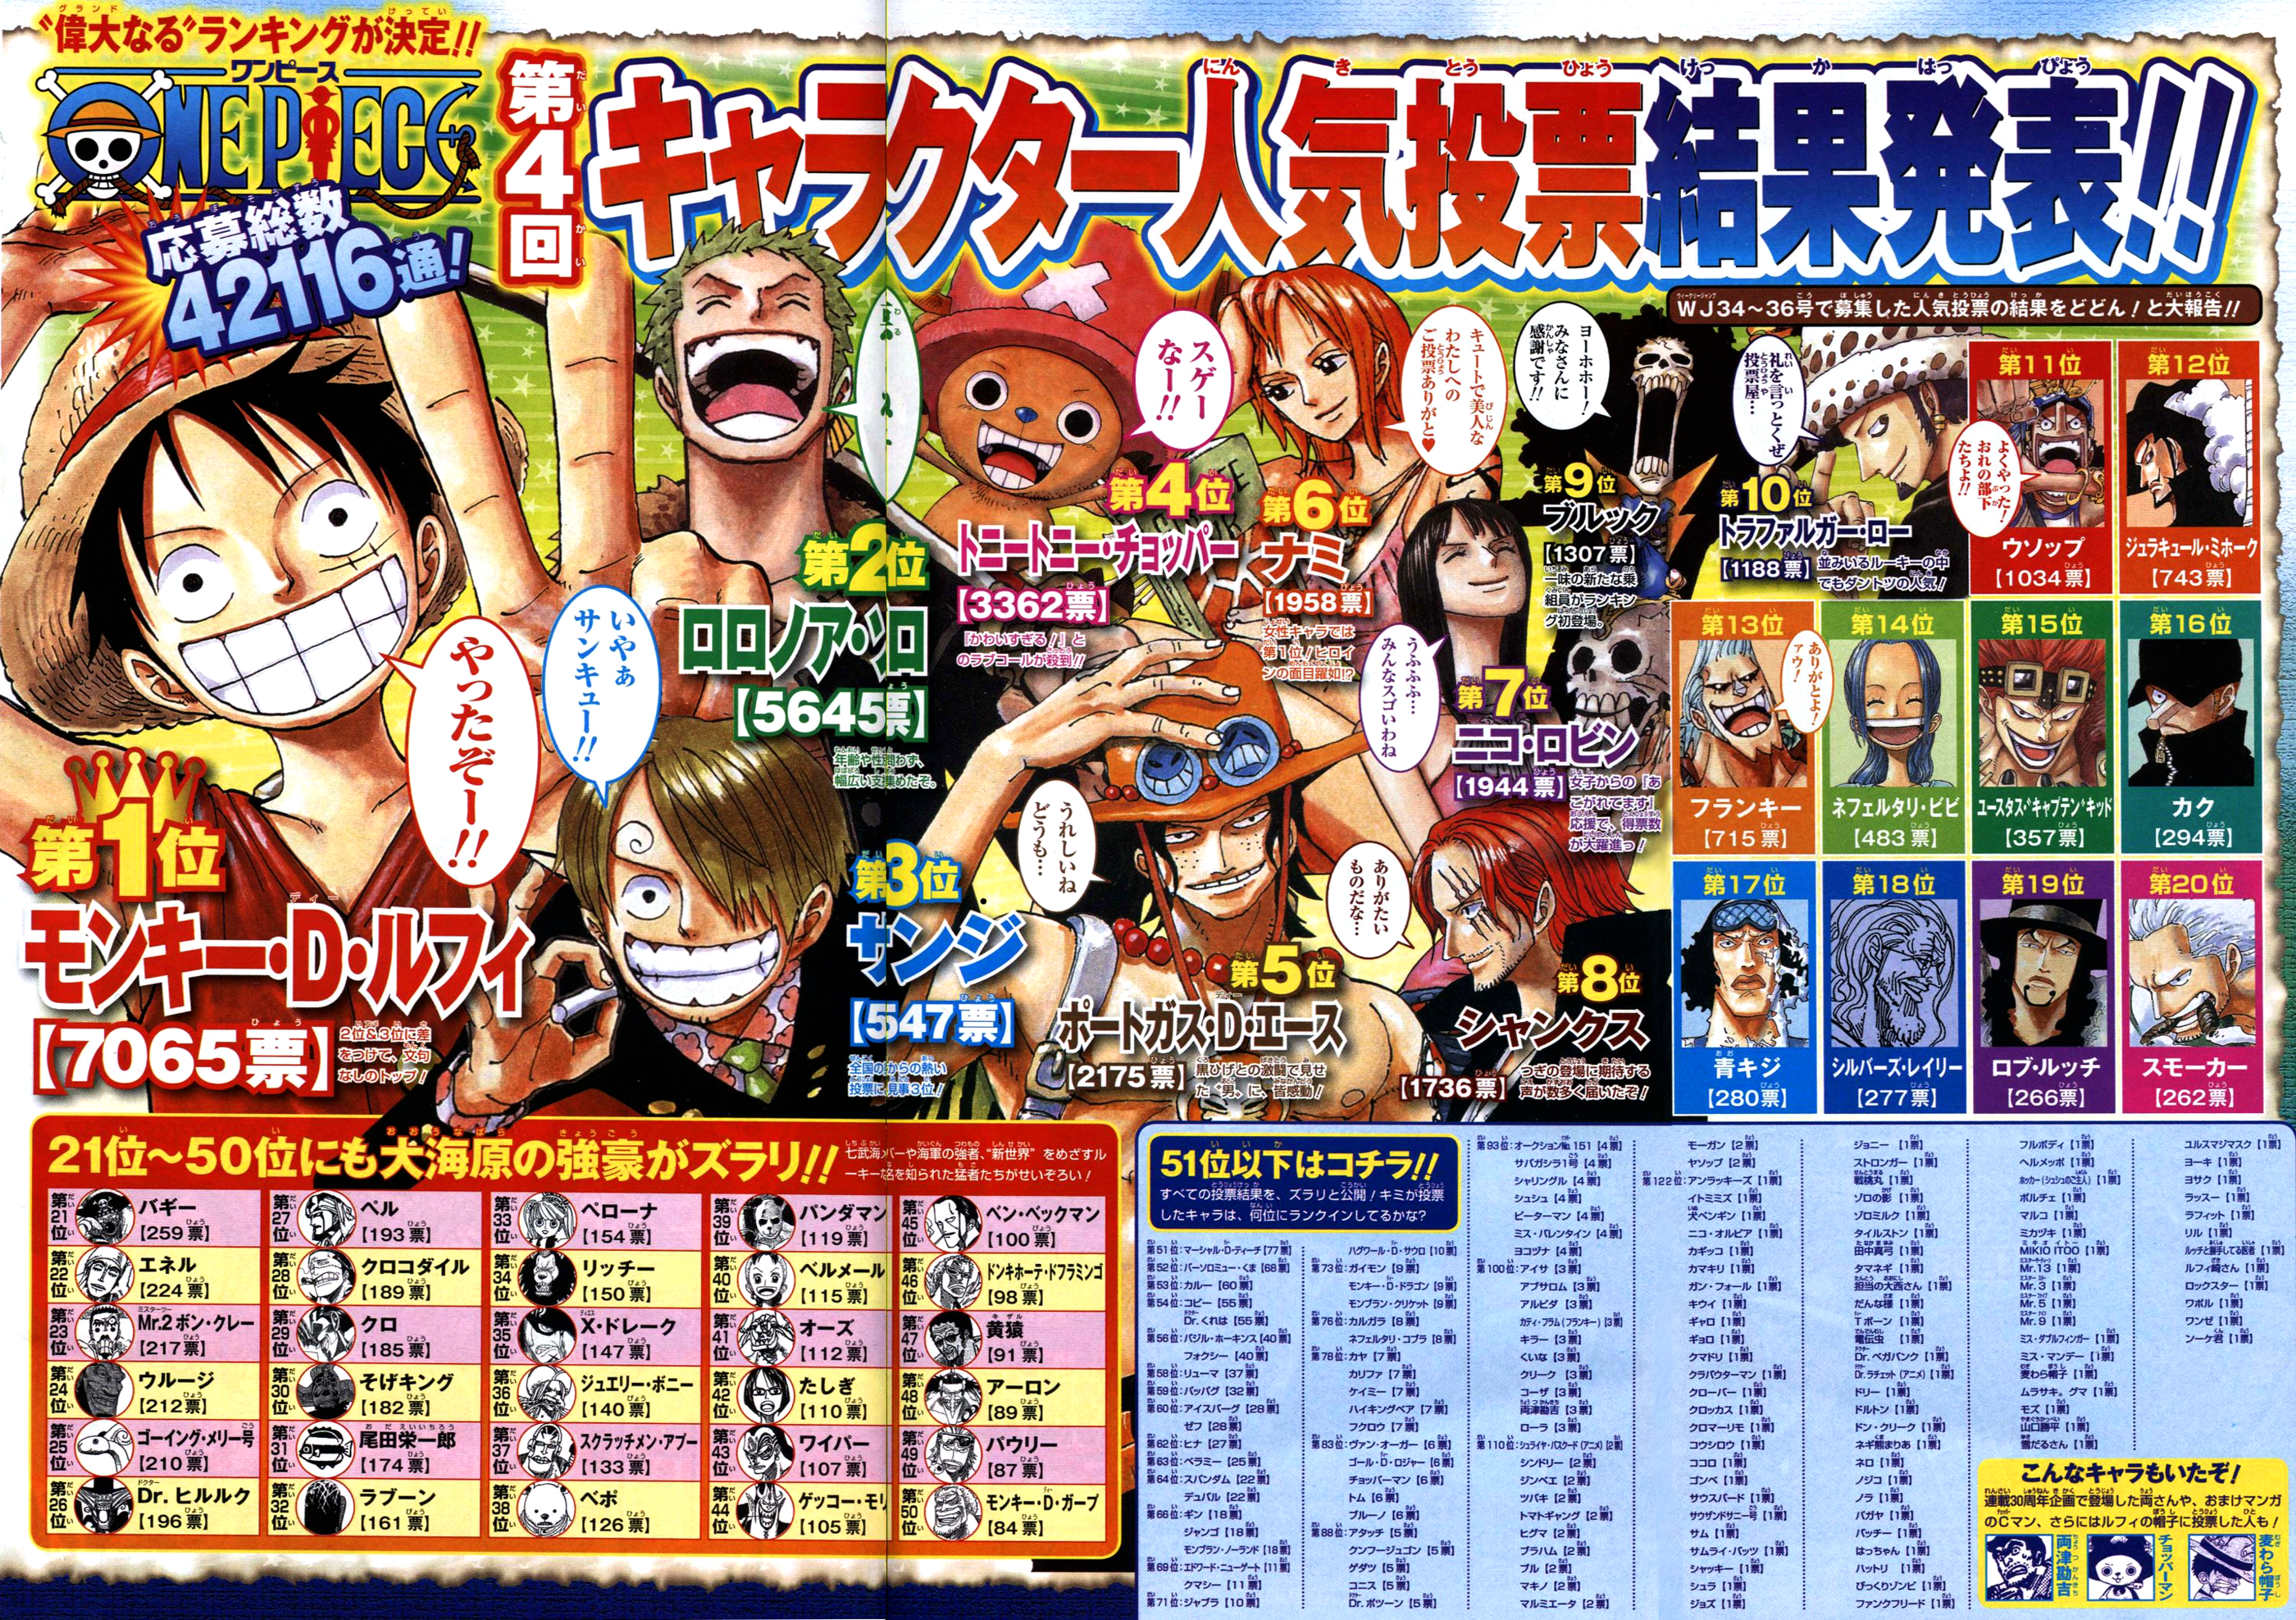 25 One Piece openings ranked from least favorite to favorite. - Gen.  Discussion - Comic Vine